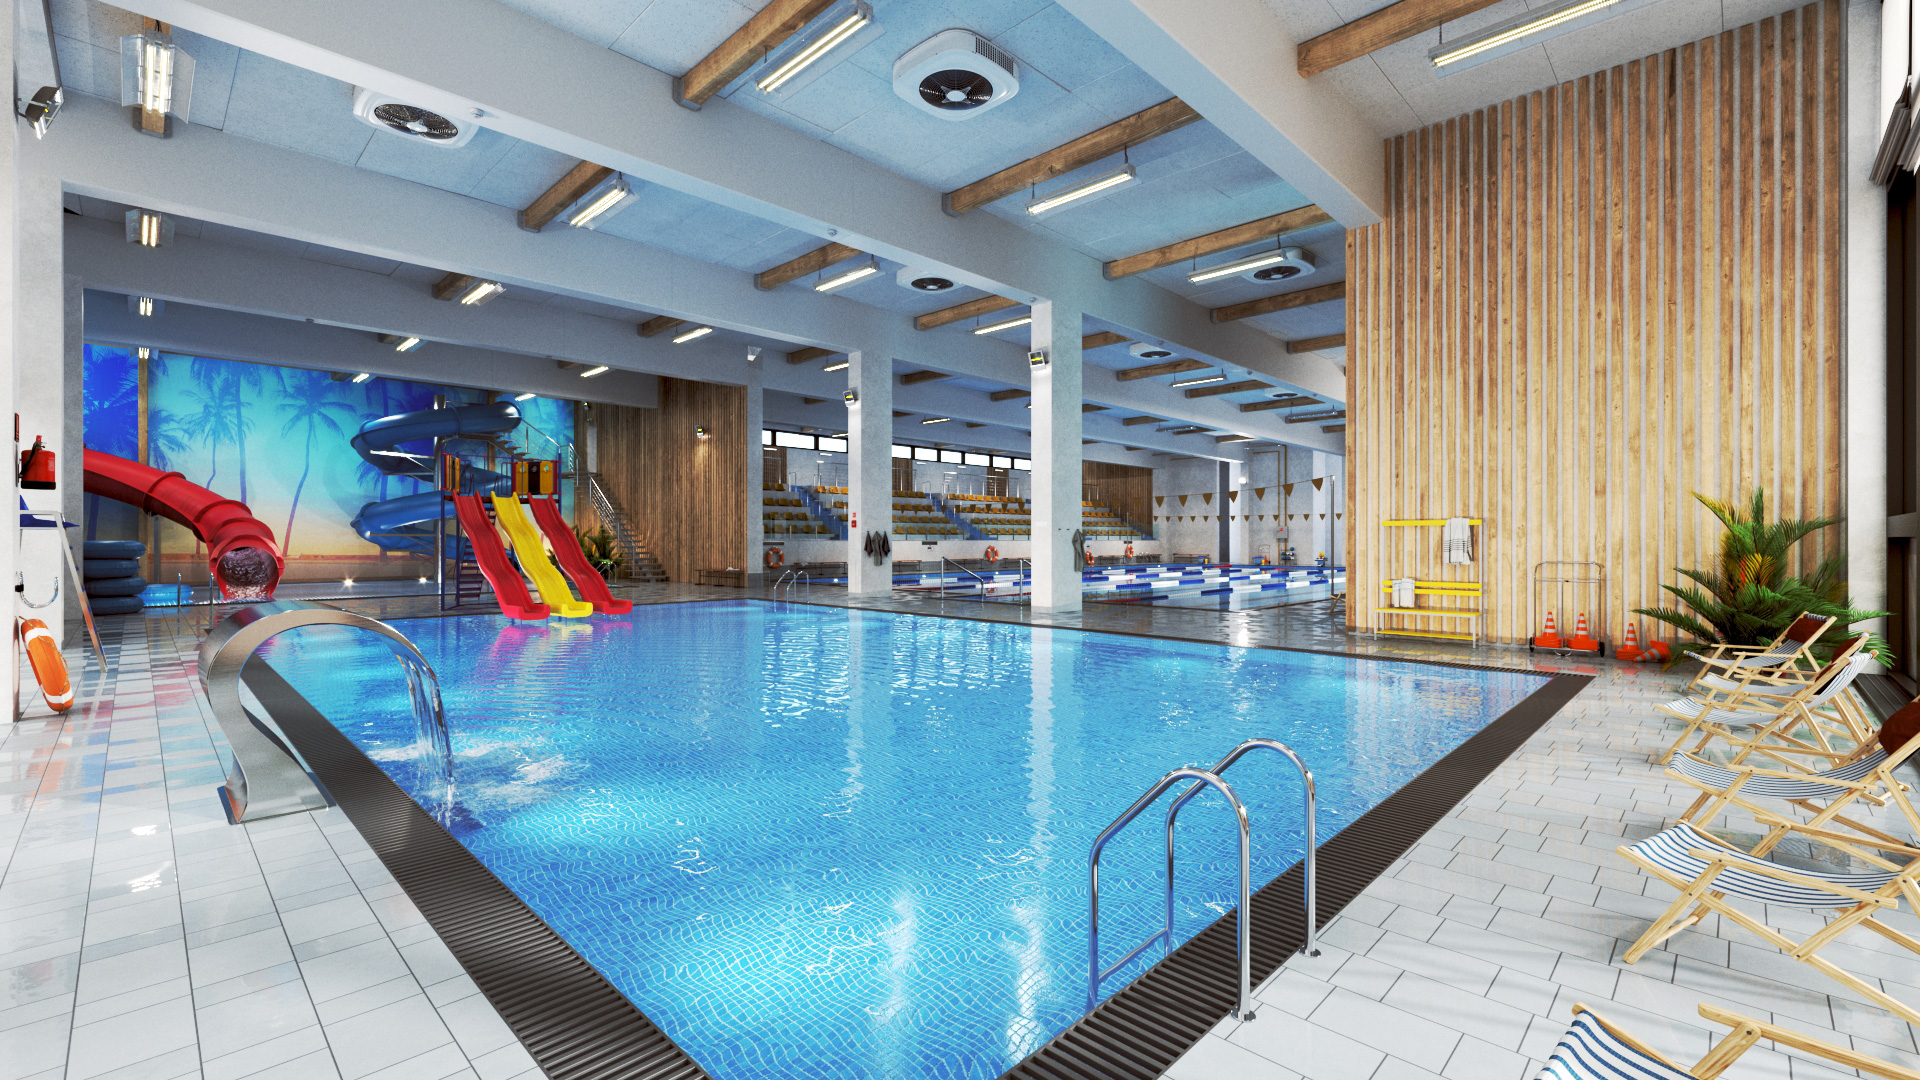 3ds Max and V-Ray: Creating swimming pool scene